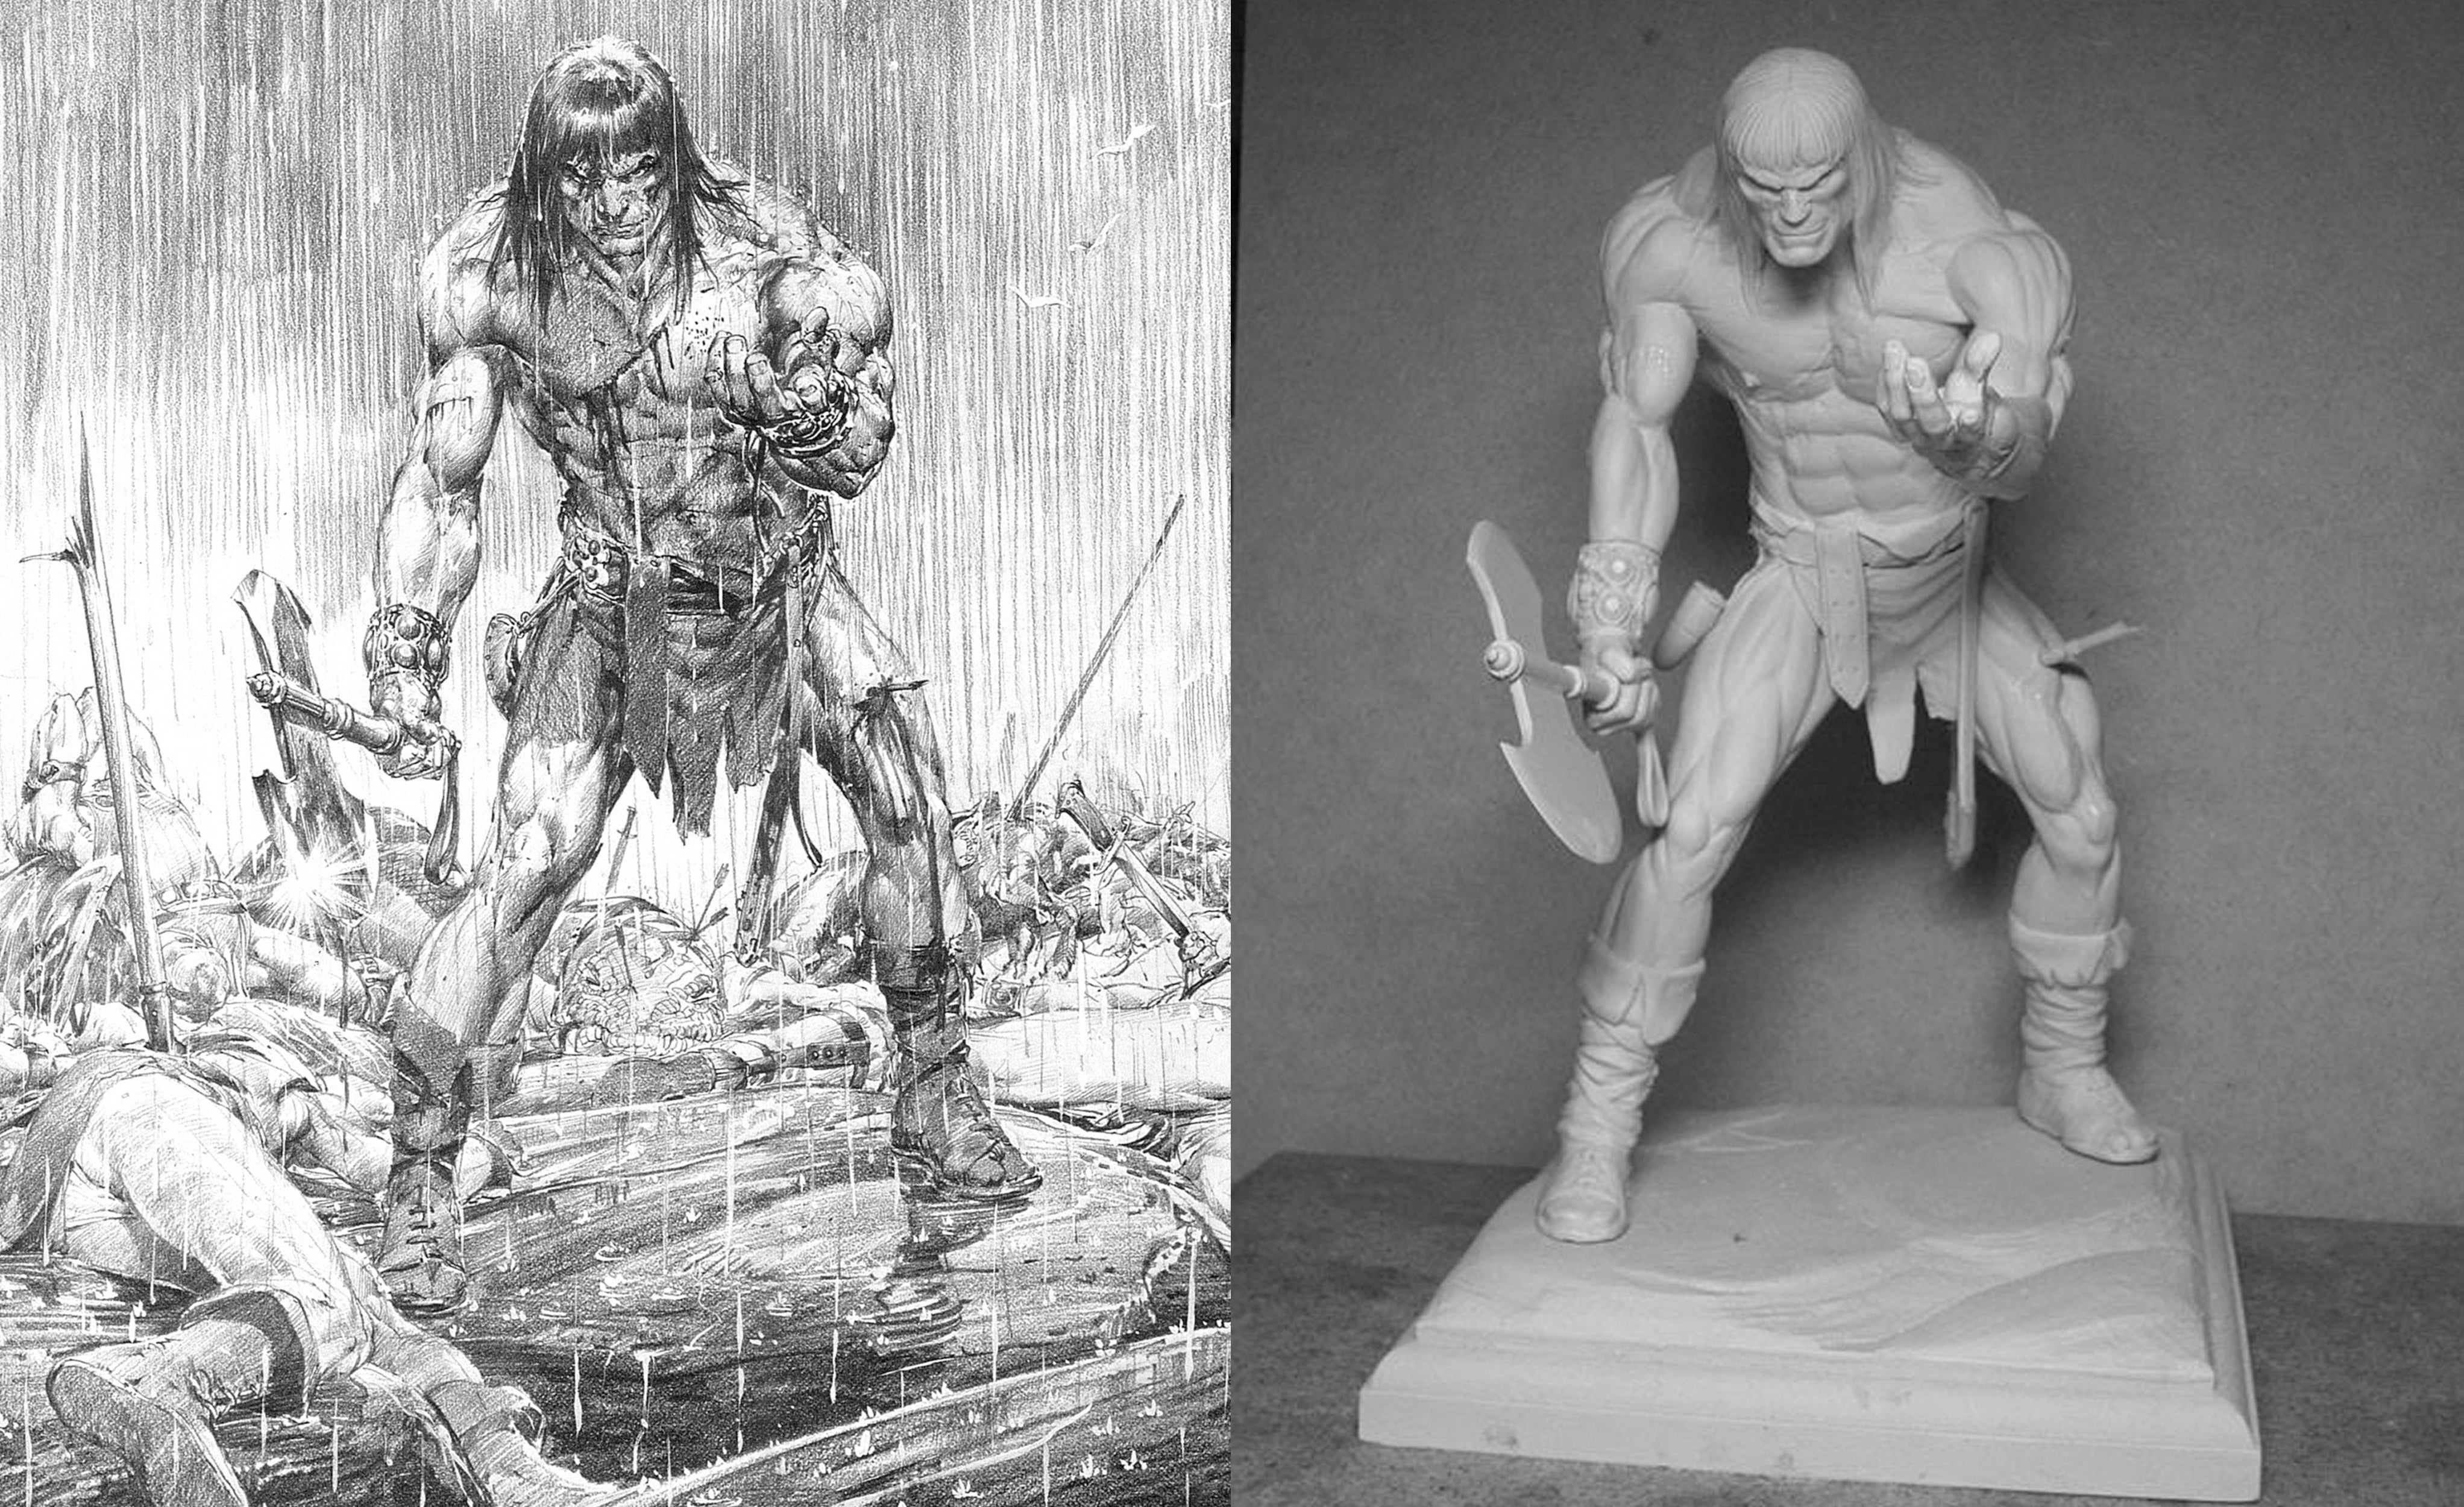 Jason’s sculpture based on Neal’s Conan drawing, “Next…”